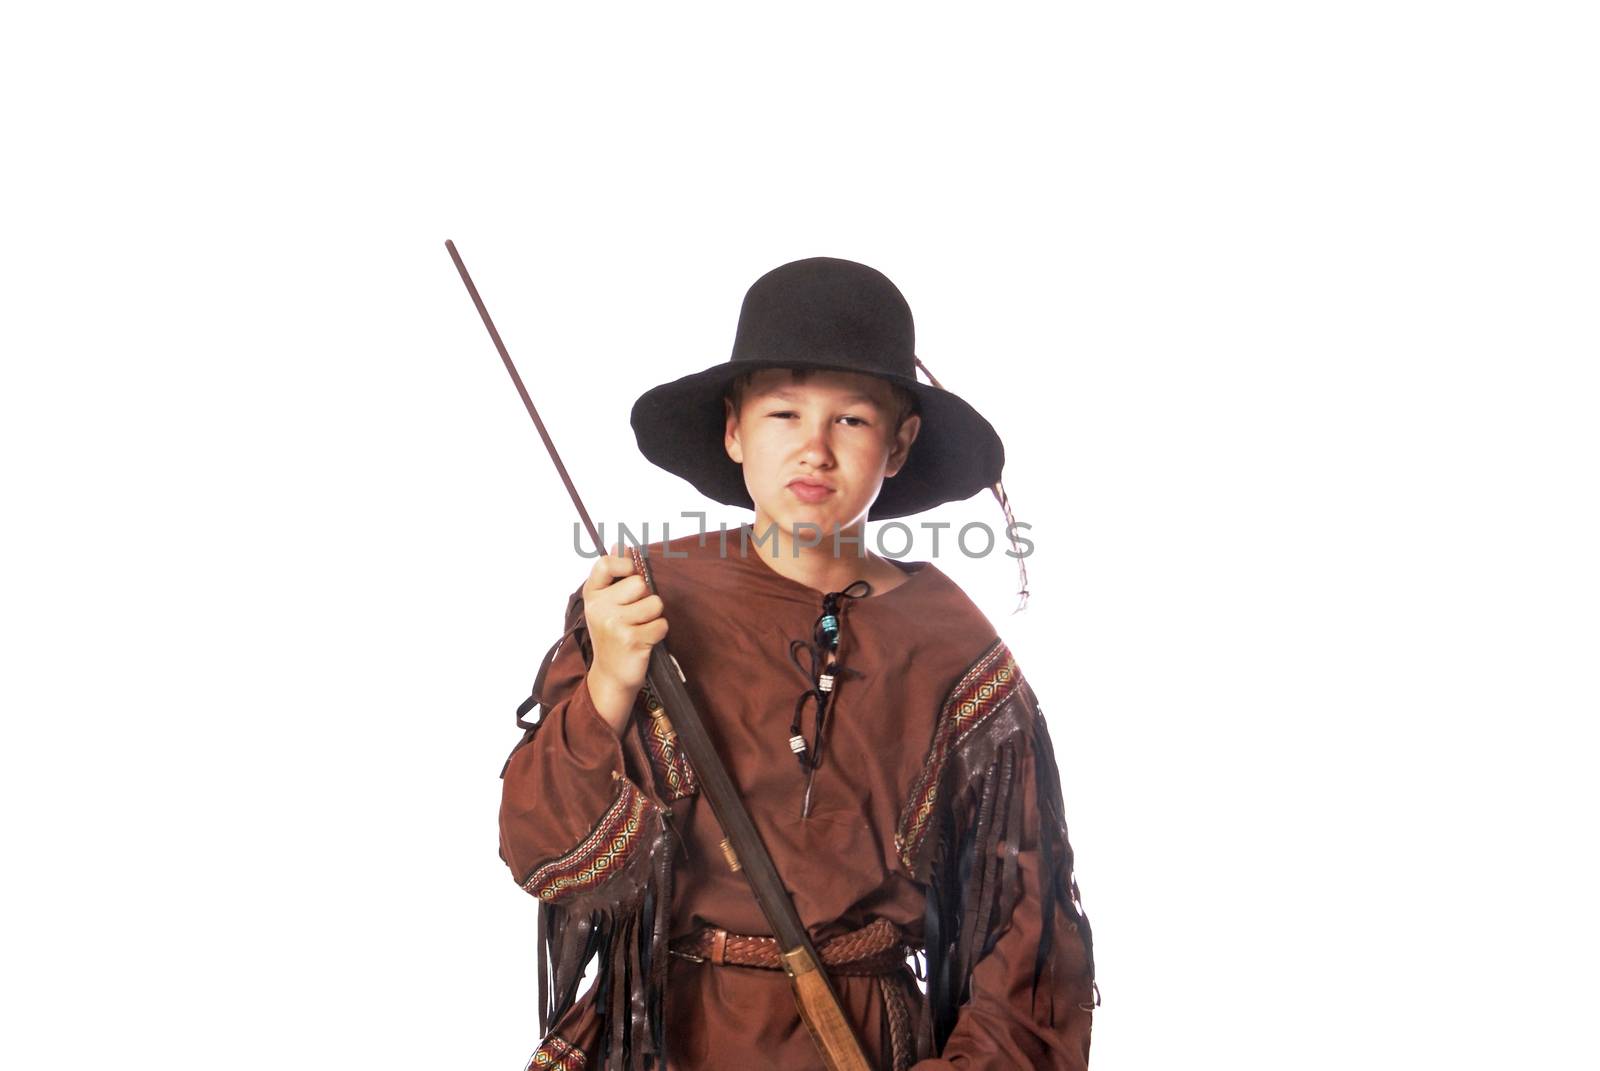 Young Fur Trapper From Early American History by rcarner